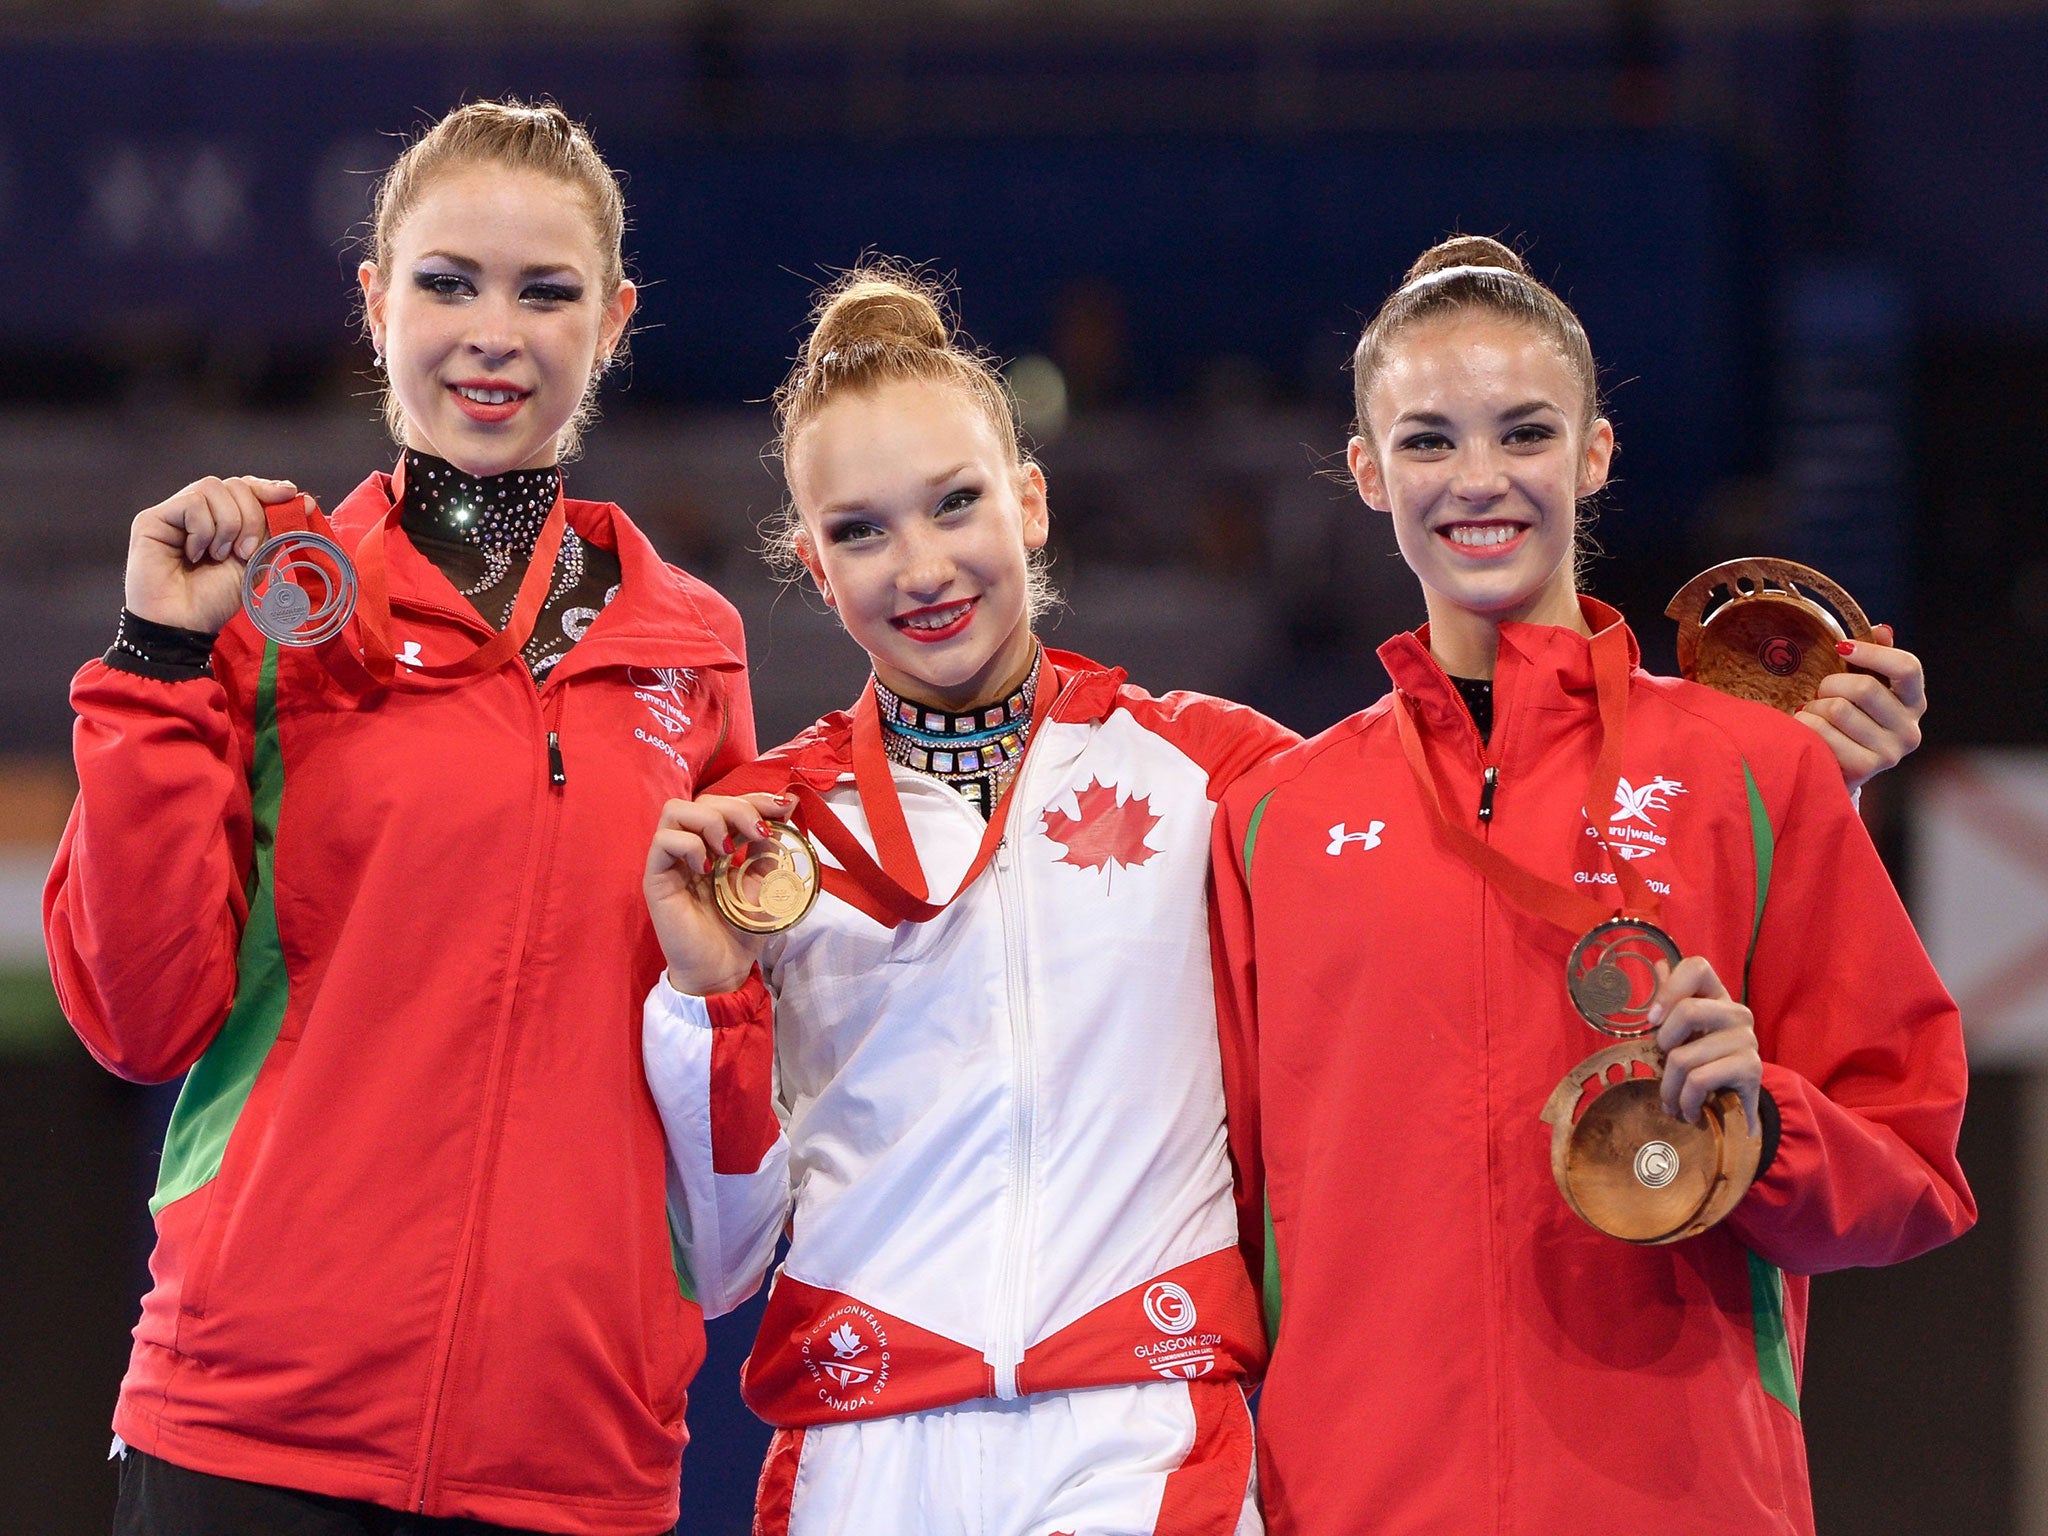 From left to right: silver medal winner Wales' Francesca Jones, gold medal winner Canada's Patricia Bezzoubenko and bronze medal winner Wales' Laura Halford with their medals